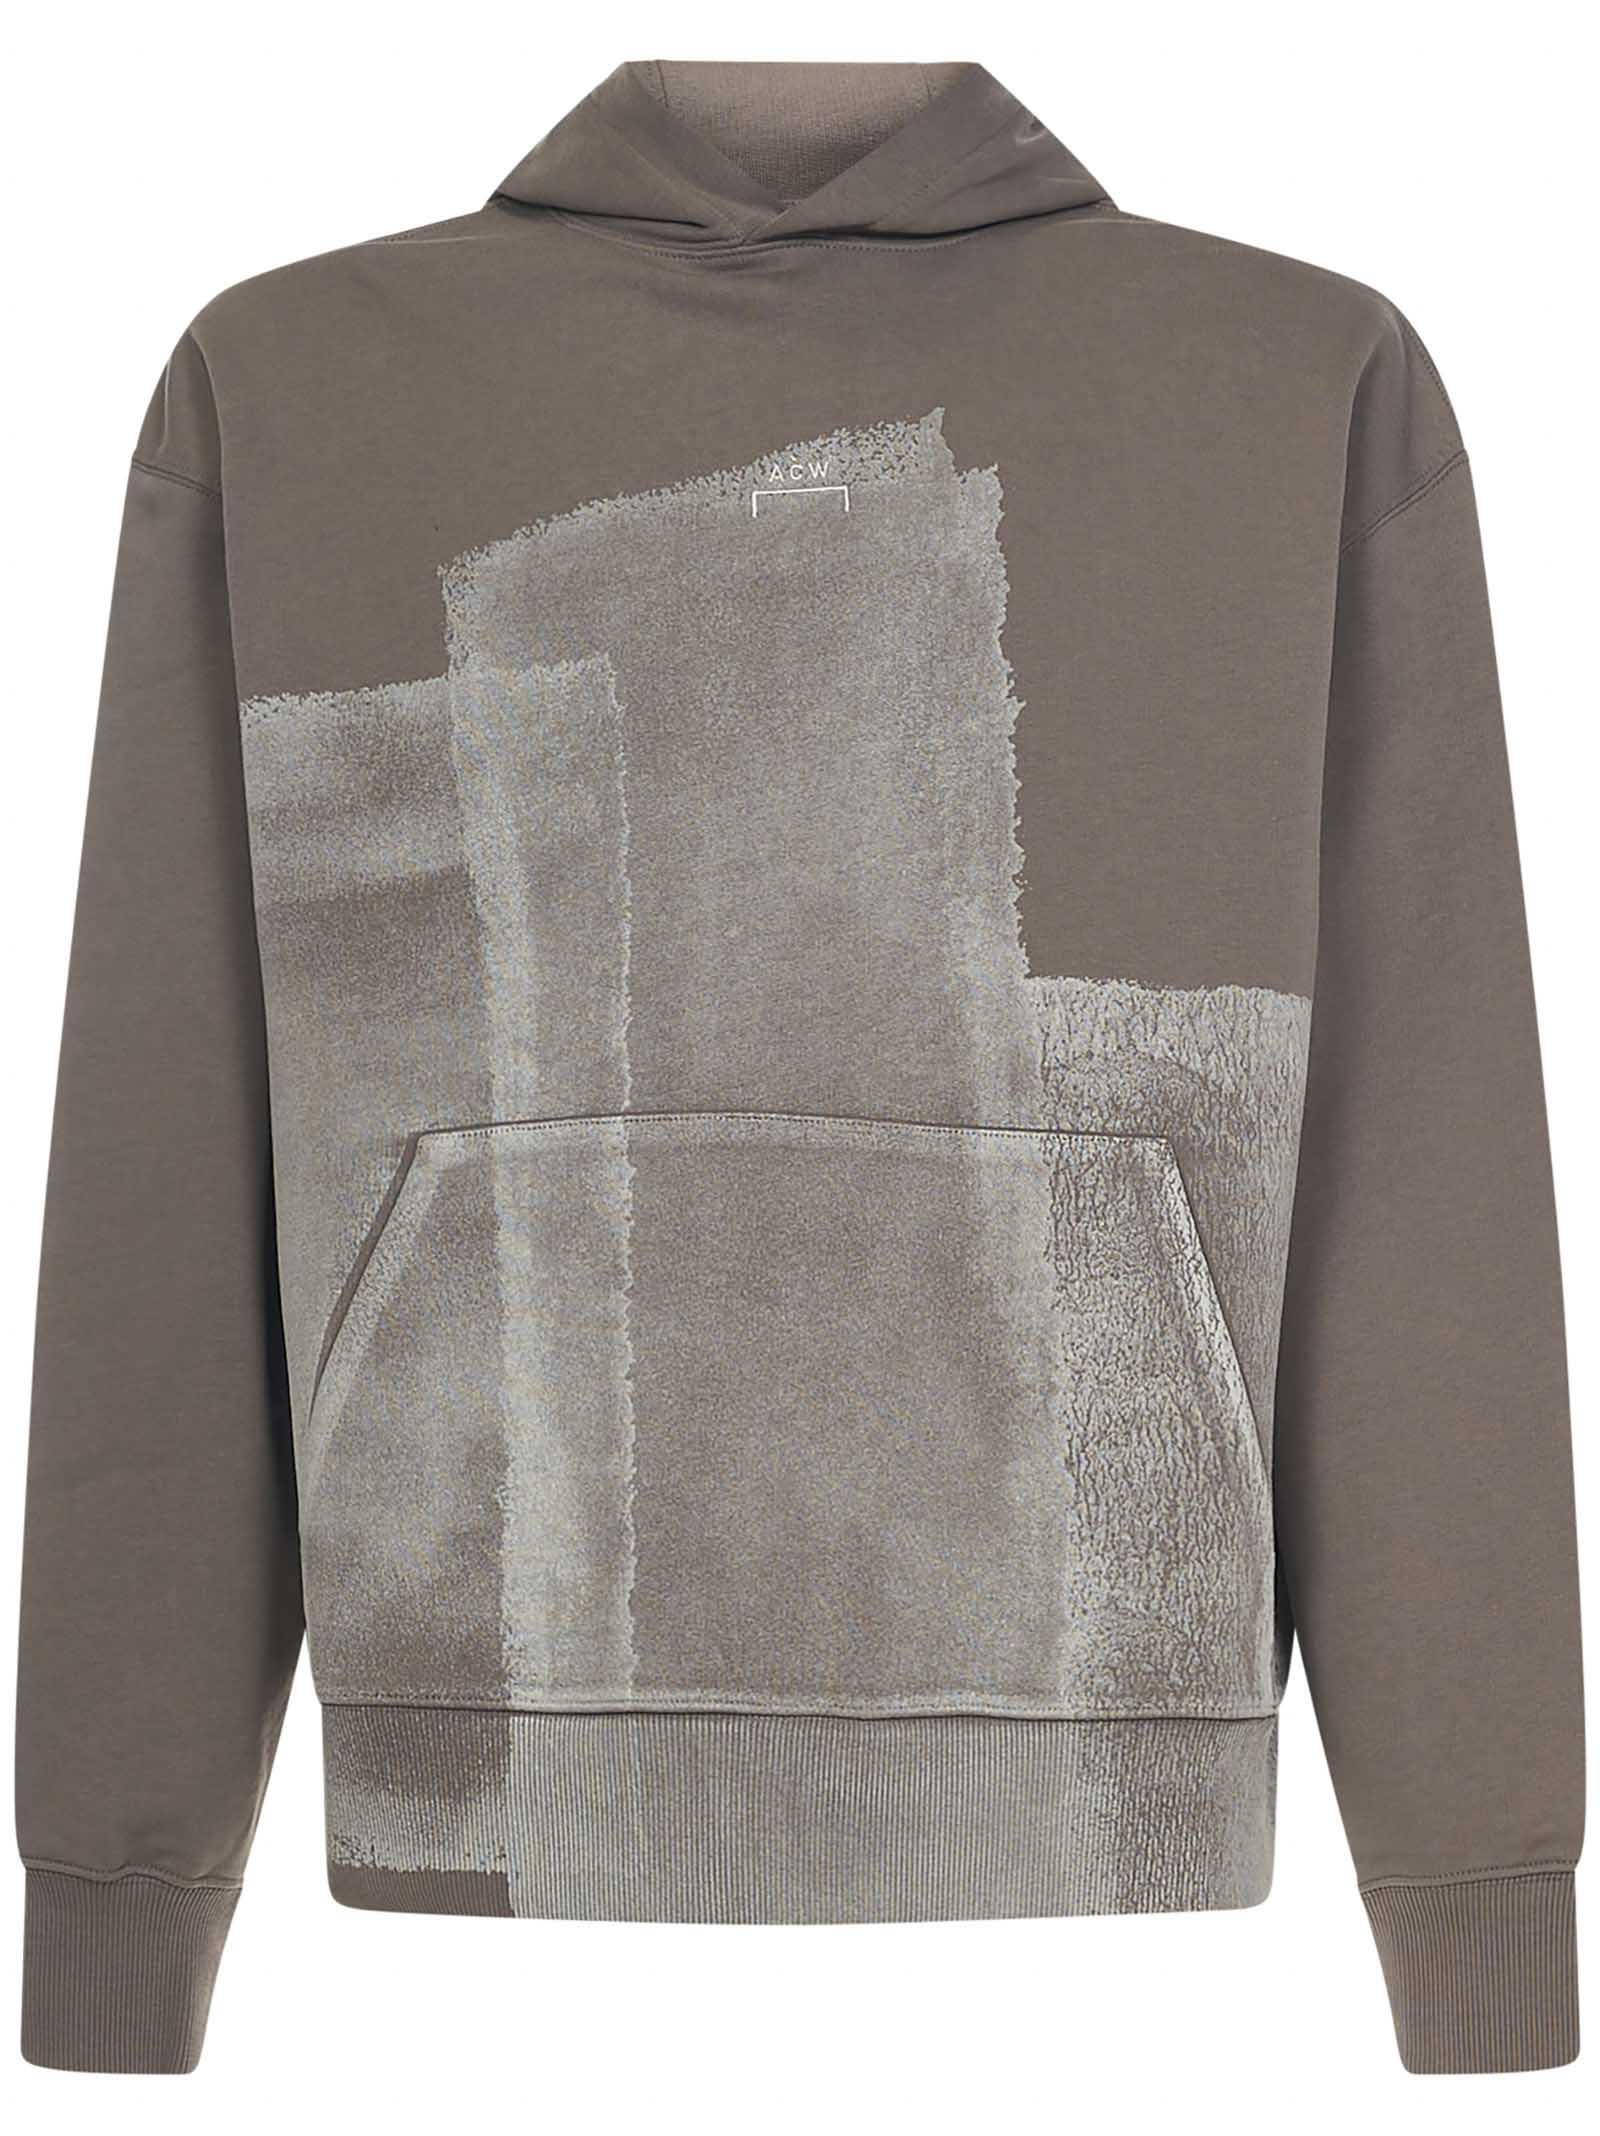 A-COLD-WALL Collage Sweatshirt